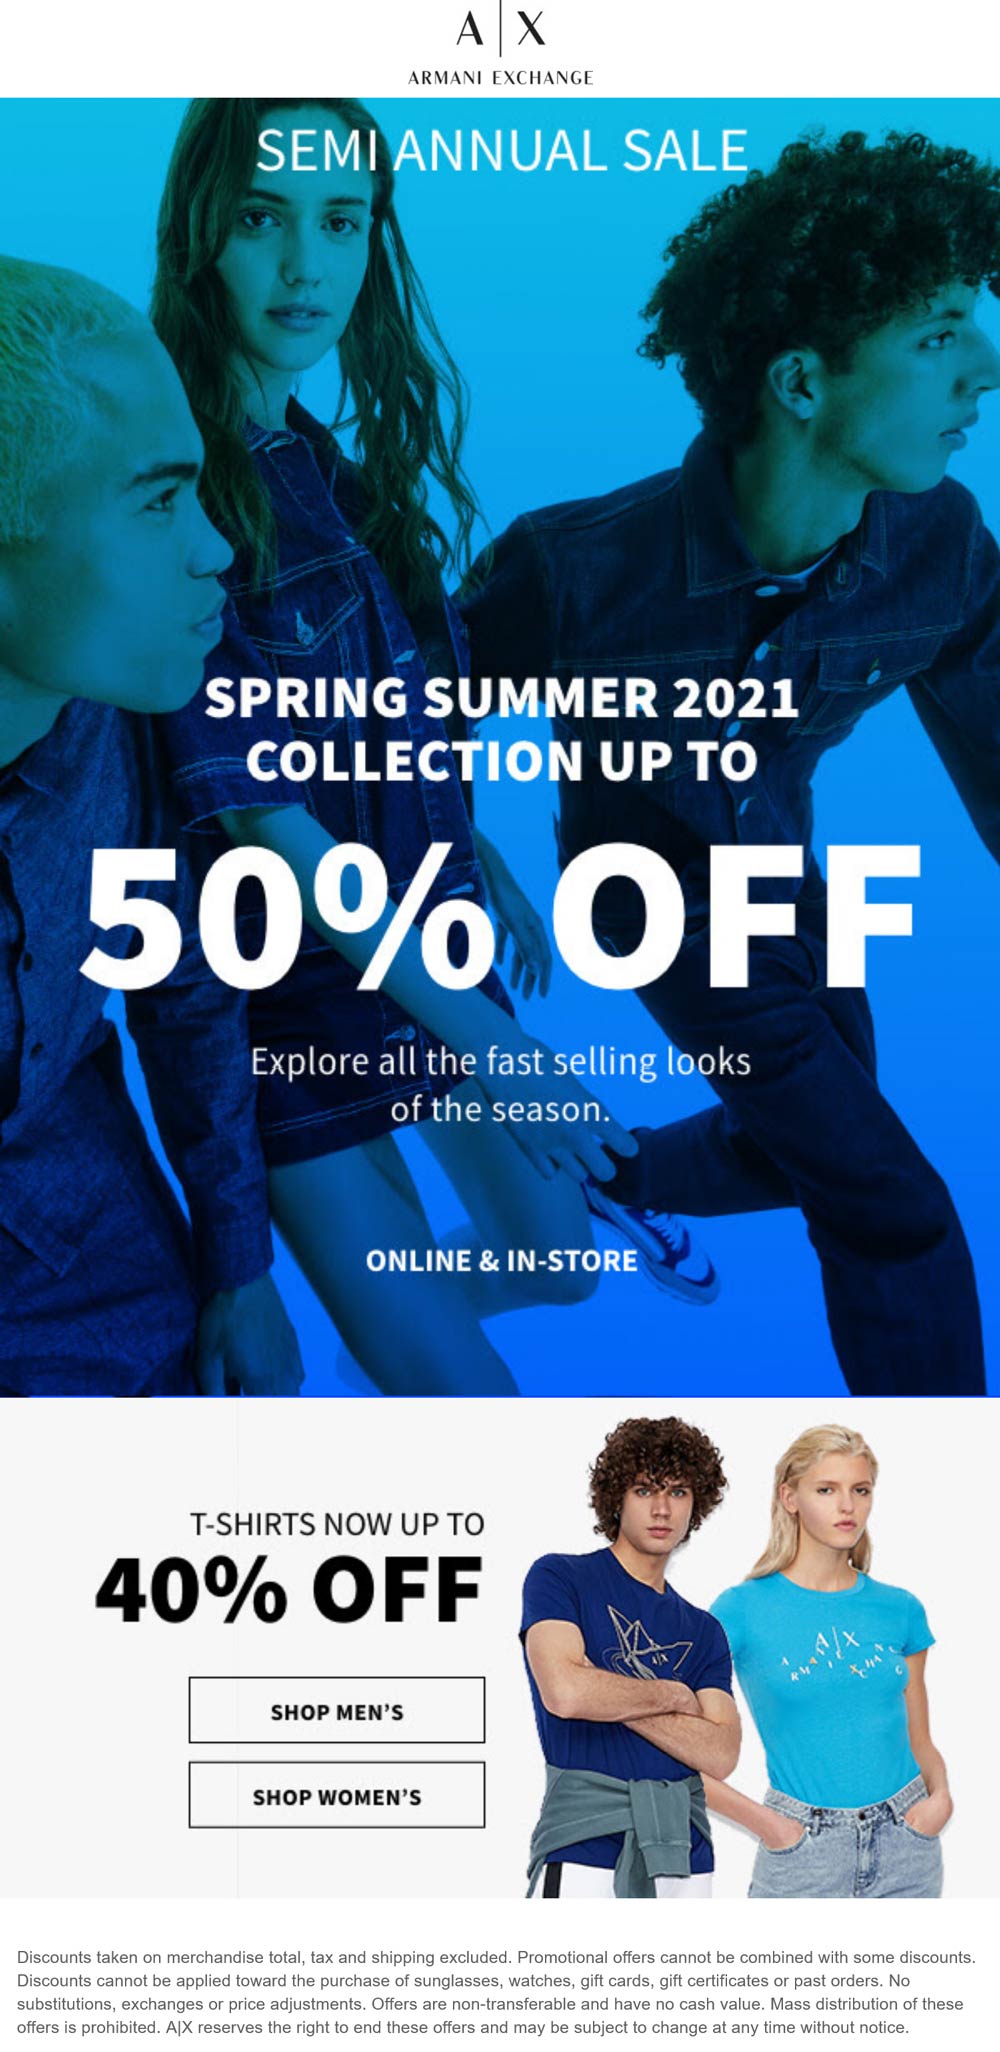 Armani Exchange stores Coupon  40-50% off summer collection at Armani Exchange, ditto online #armaniexchange 